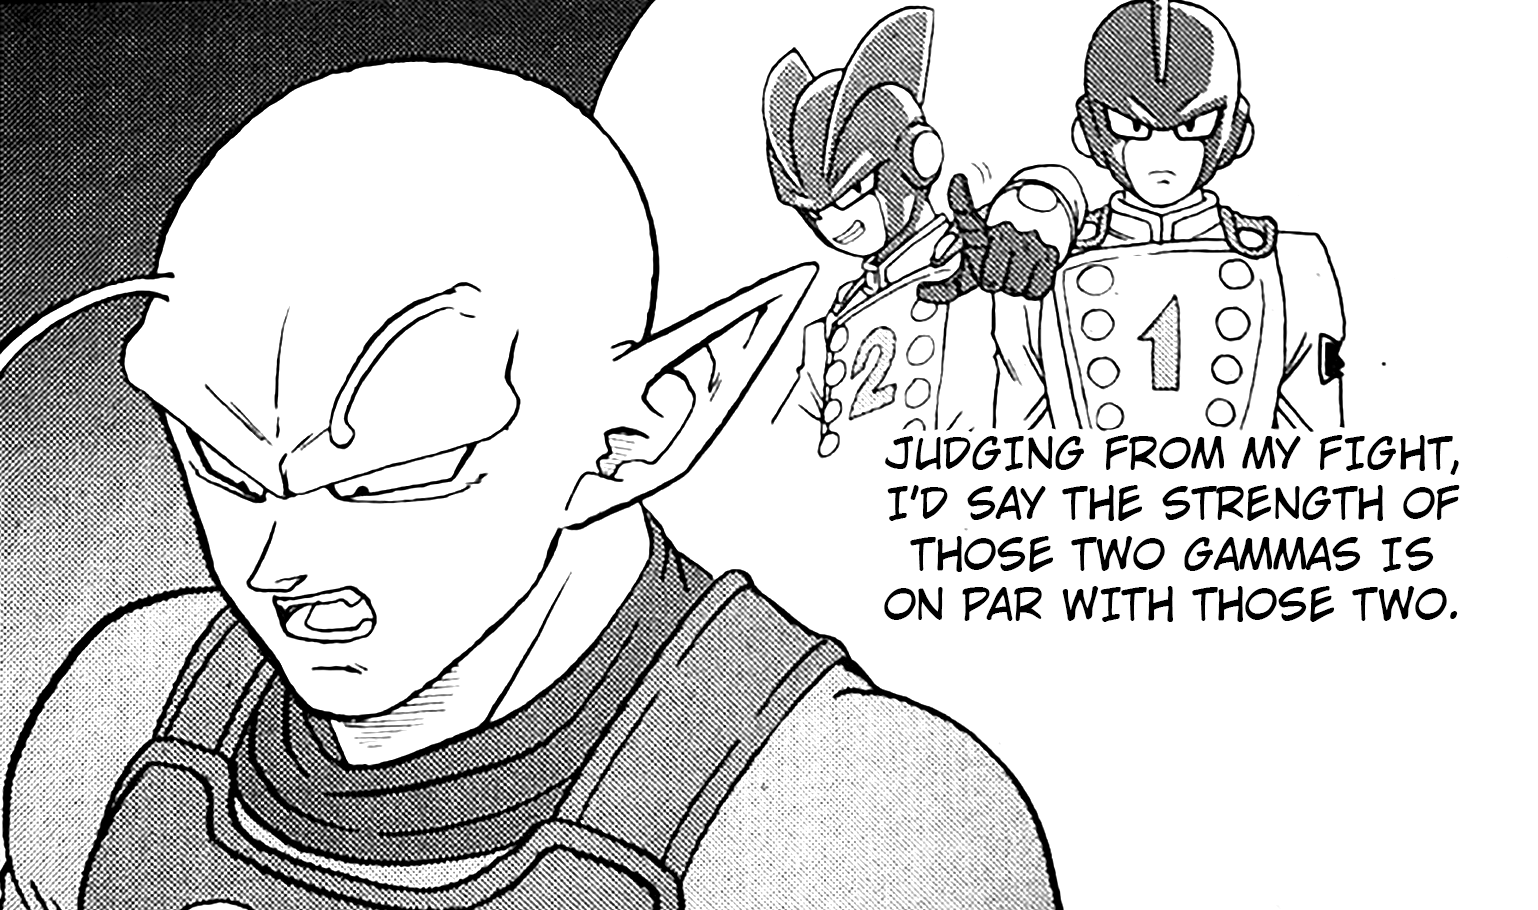 Dragon Ball Super Manga Ch92. The official chapter releases on 20